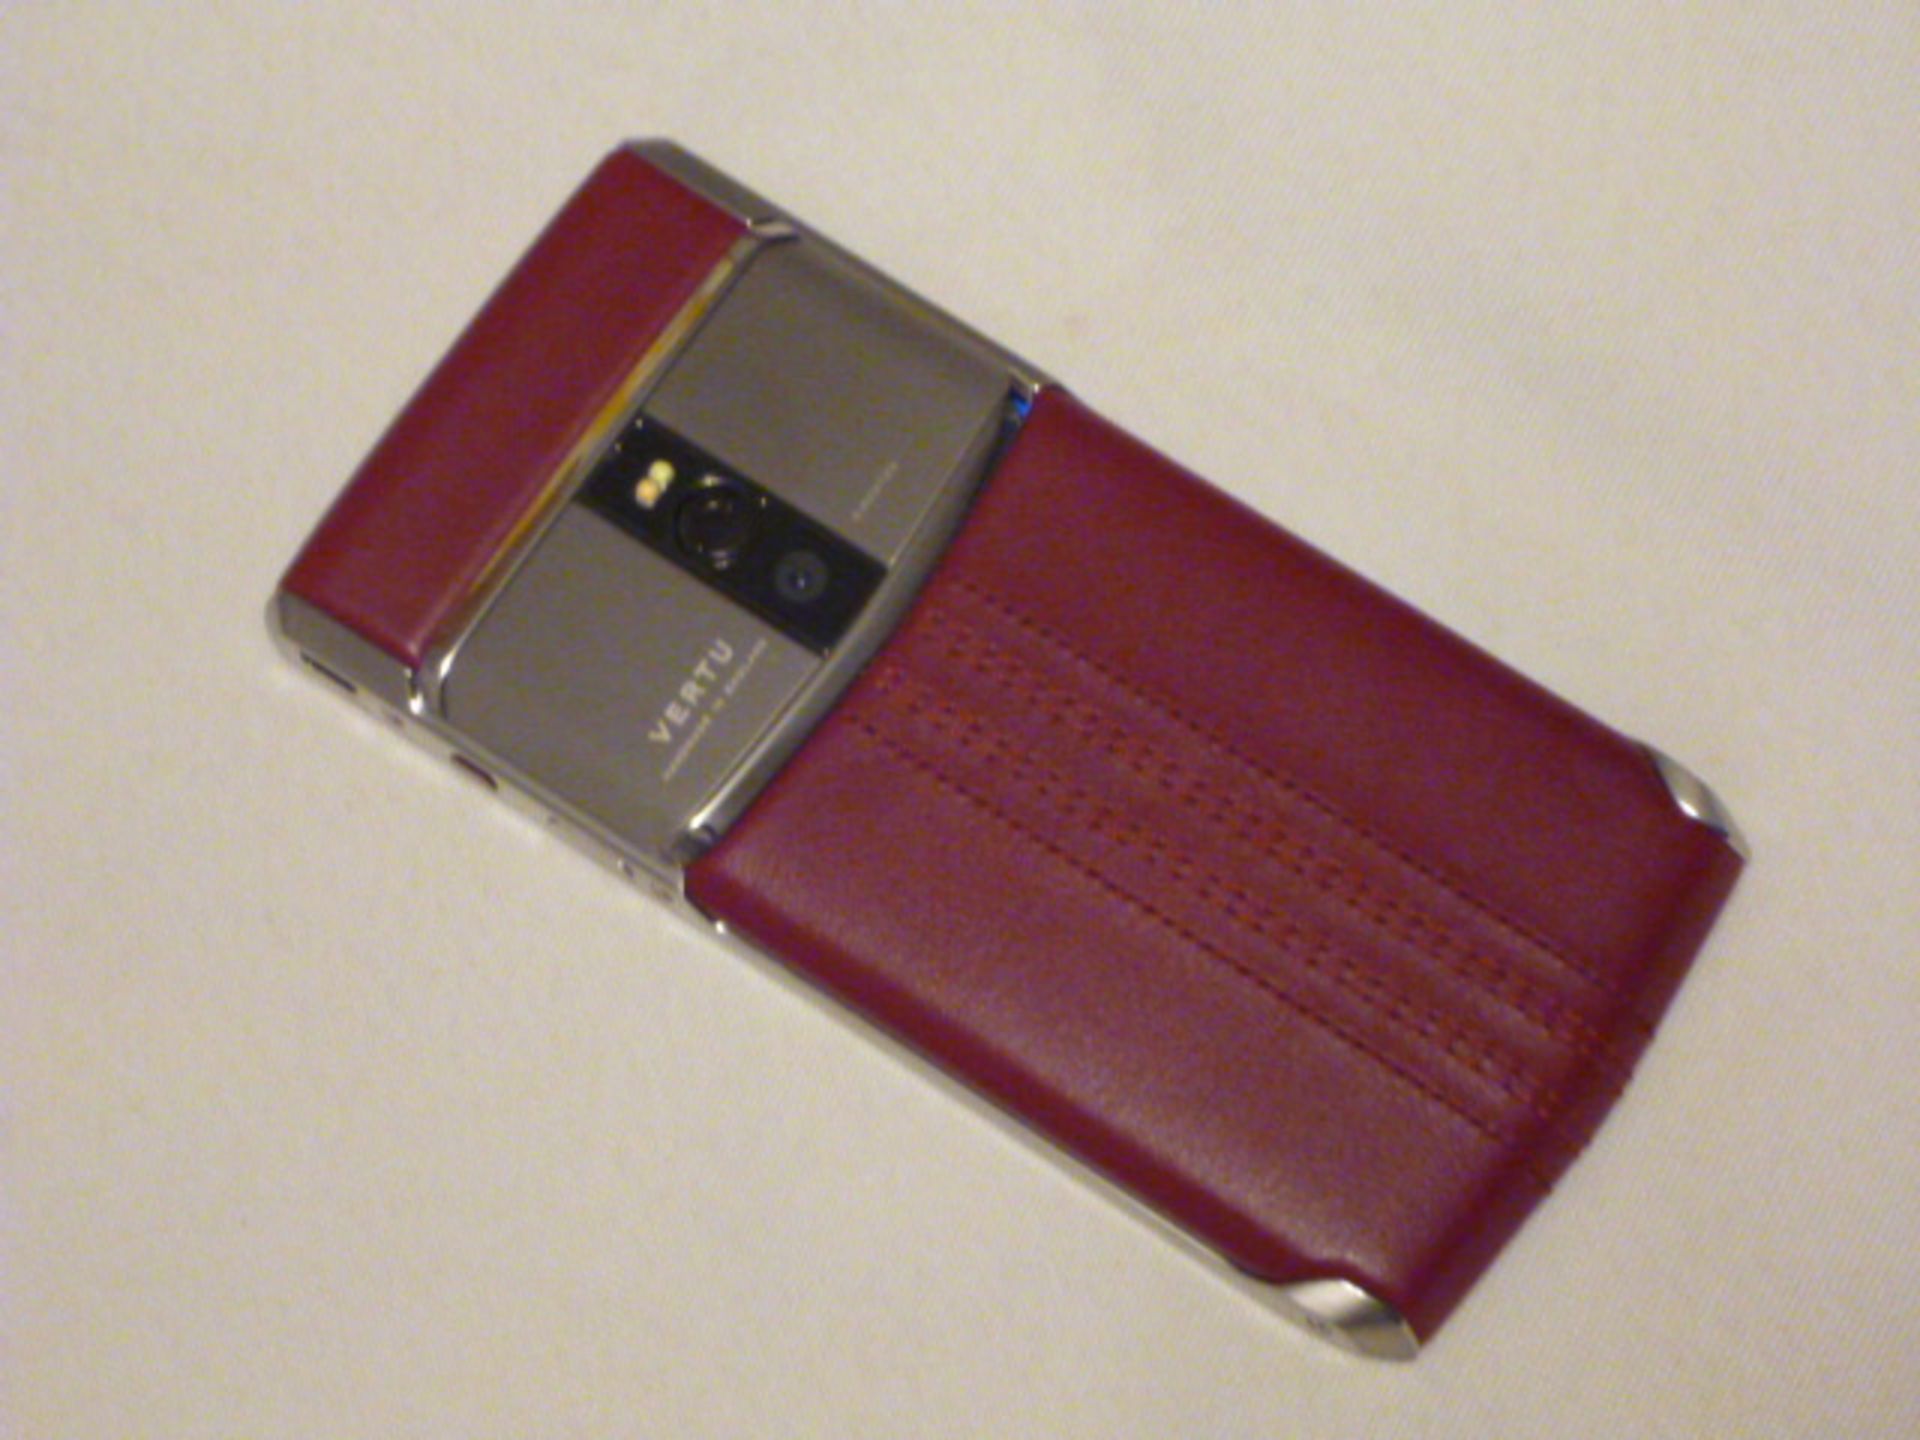 Vertu Signature Touch Phone with Garnet Leather, S/N 3-020723. Comes with Sales Pack & Charging - Bild 3 aus 3